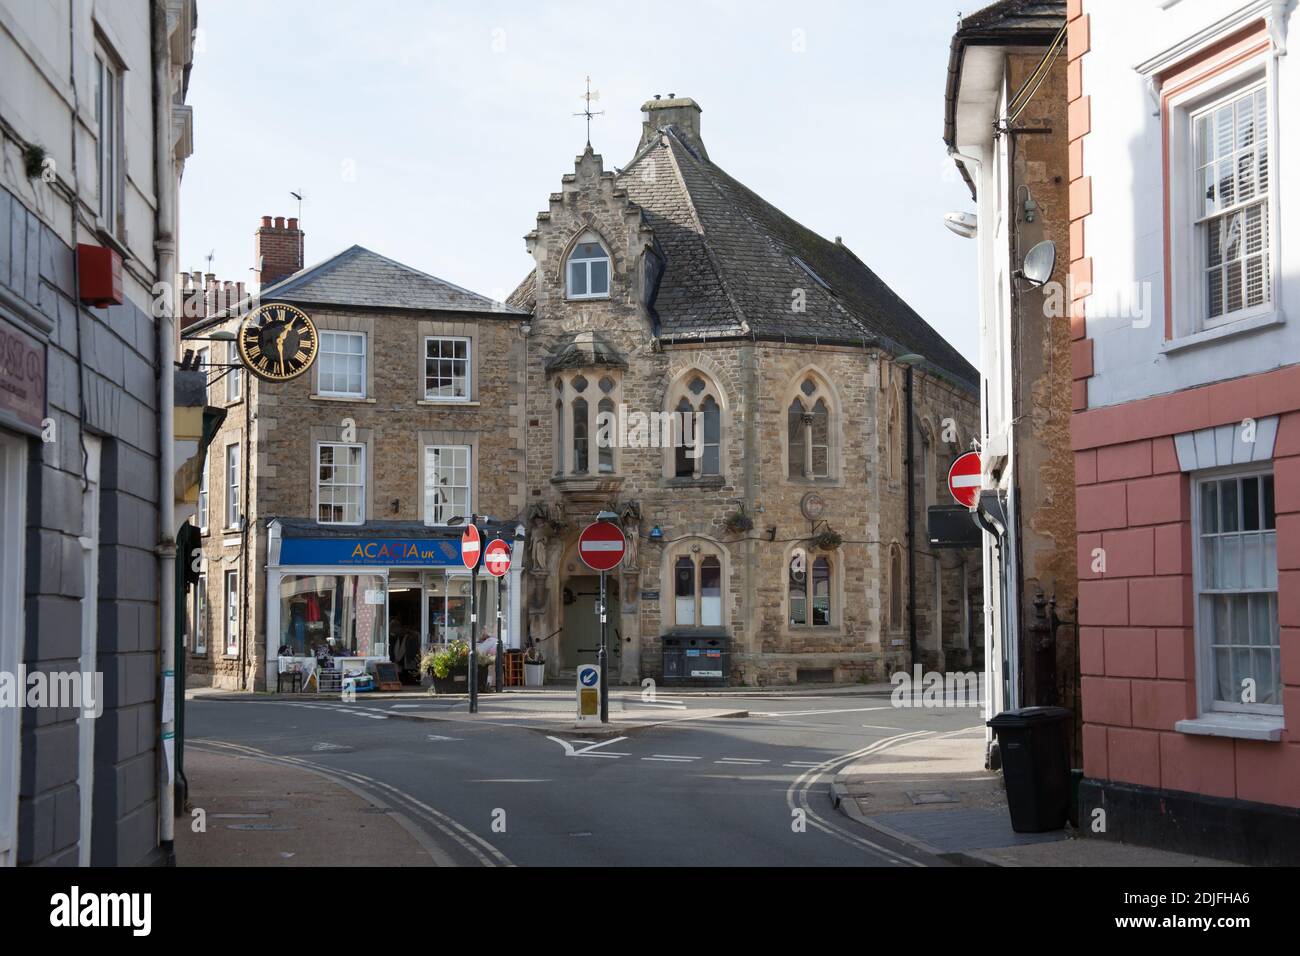 The Corn Exchange in Faringdon, Oxfordshire in the UK, taken on the 19th October 2020 Stock Photo